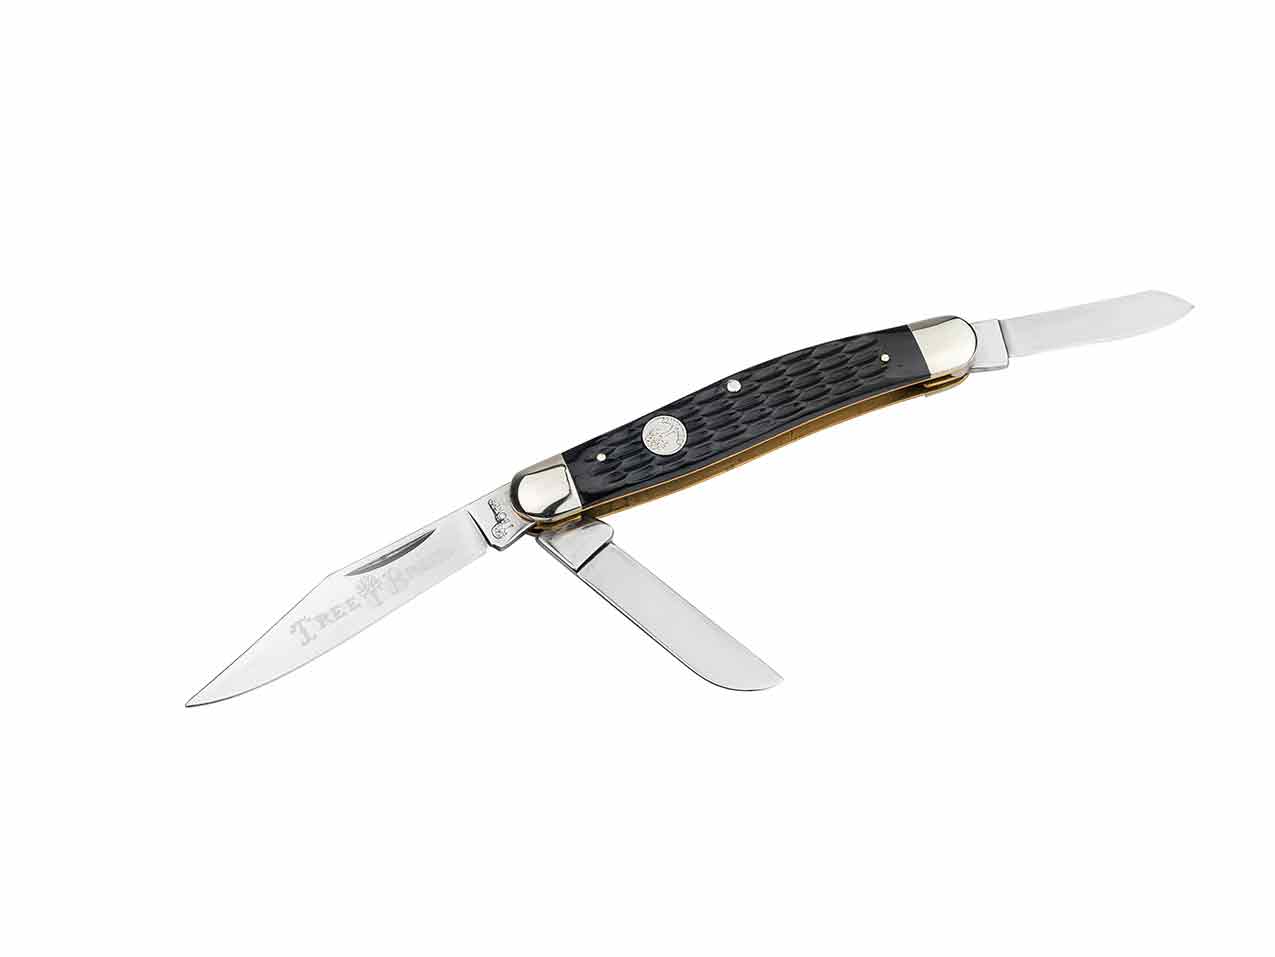  Boker Mini Trapper 3.75 Inch Pocket Knife, Jigged Black Bone,  Traditional Series 2.0, Made in Germany : Everything Else